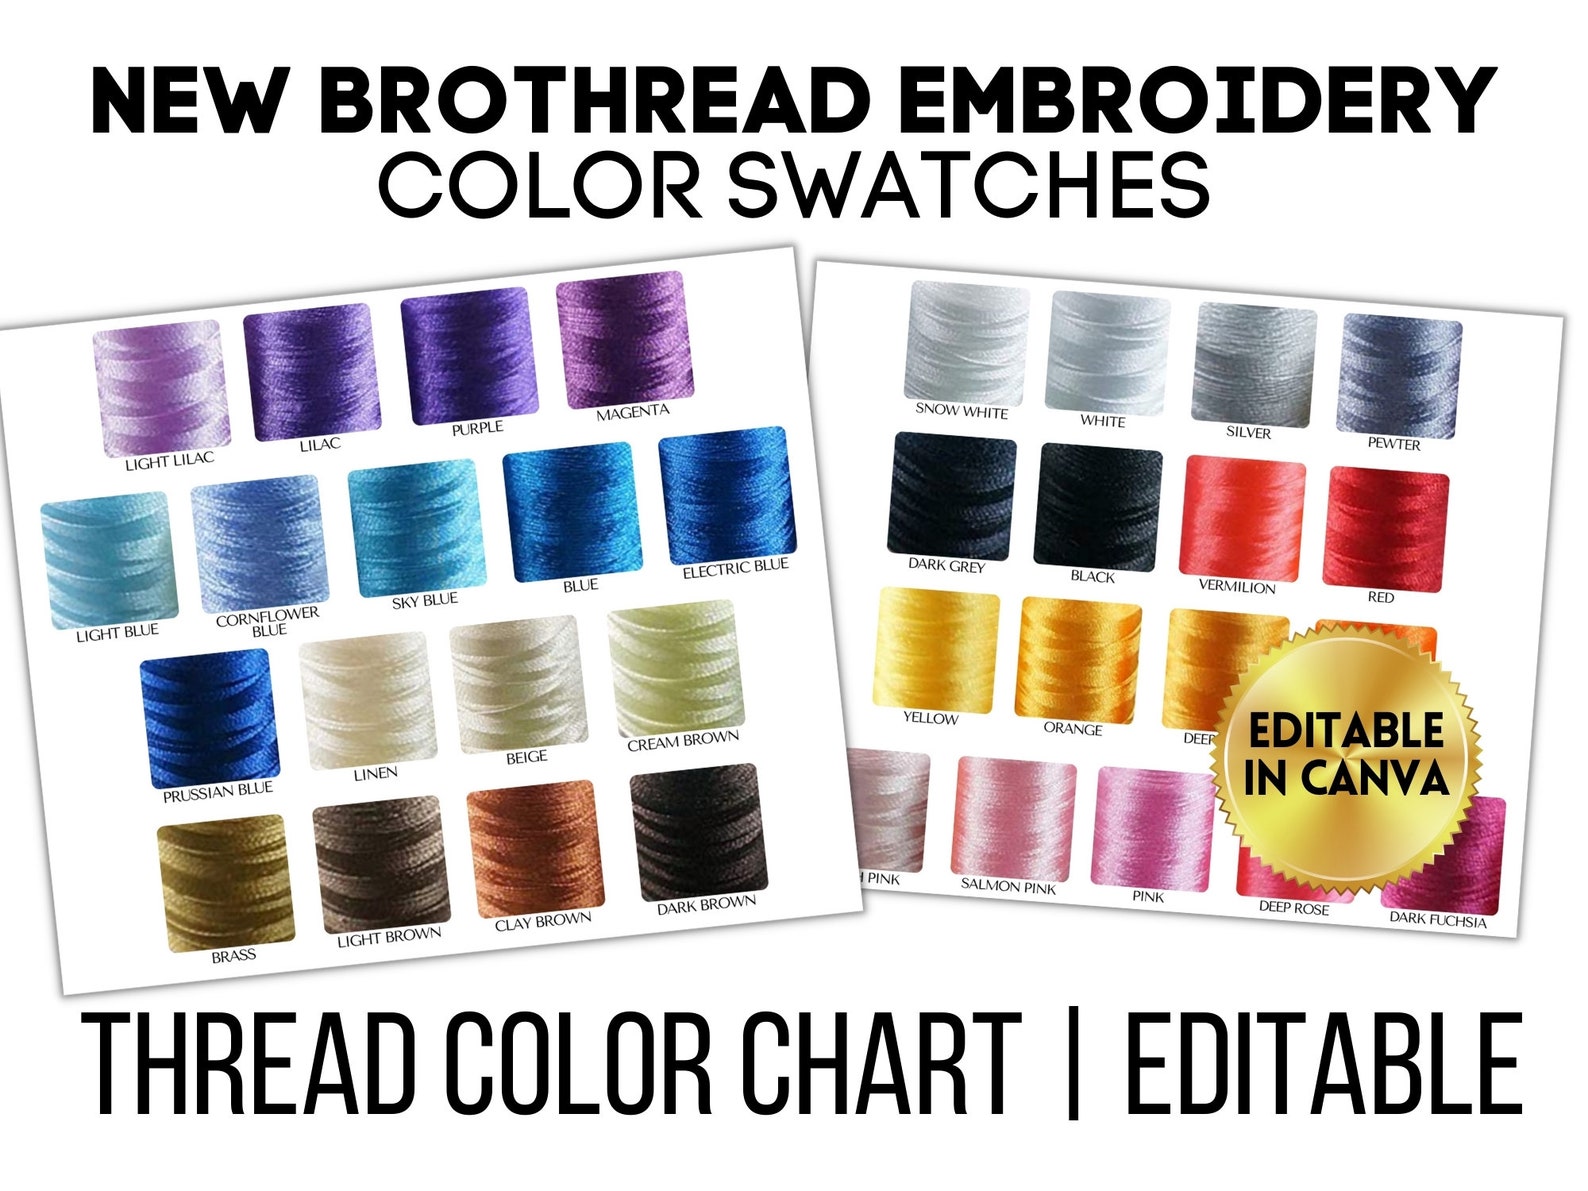 New Brothread Embroidery Thread Color Swatch Chart Graphic Etsy